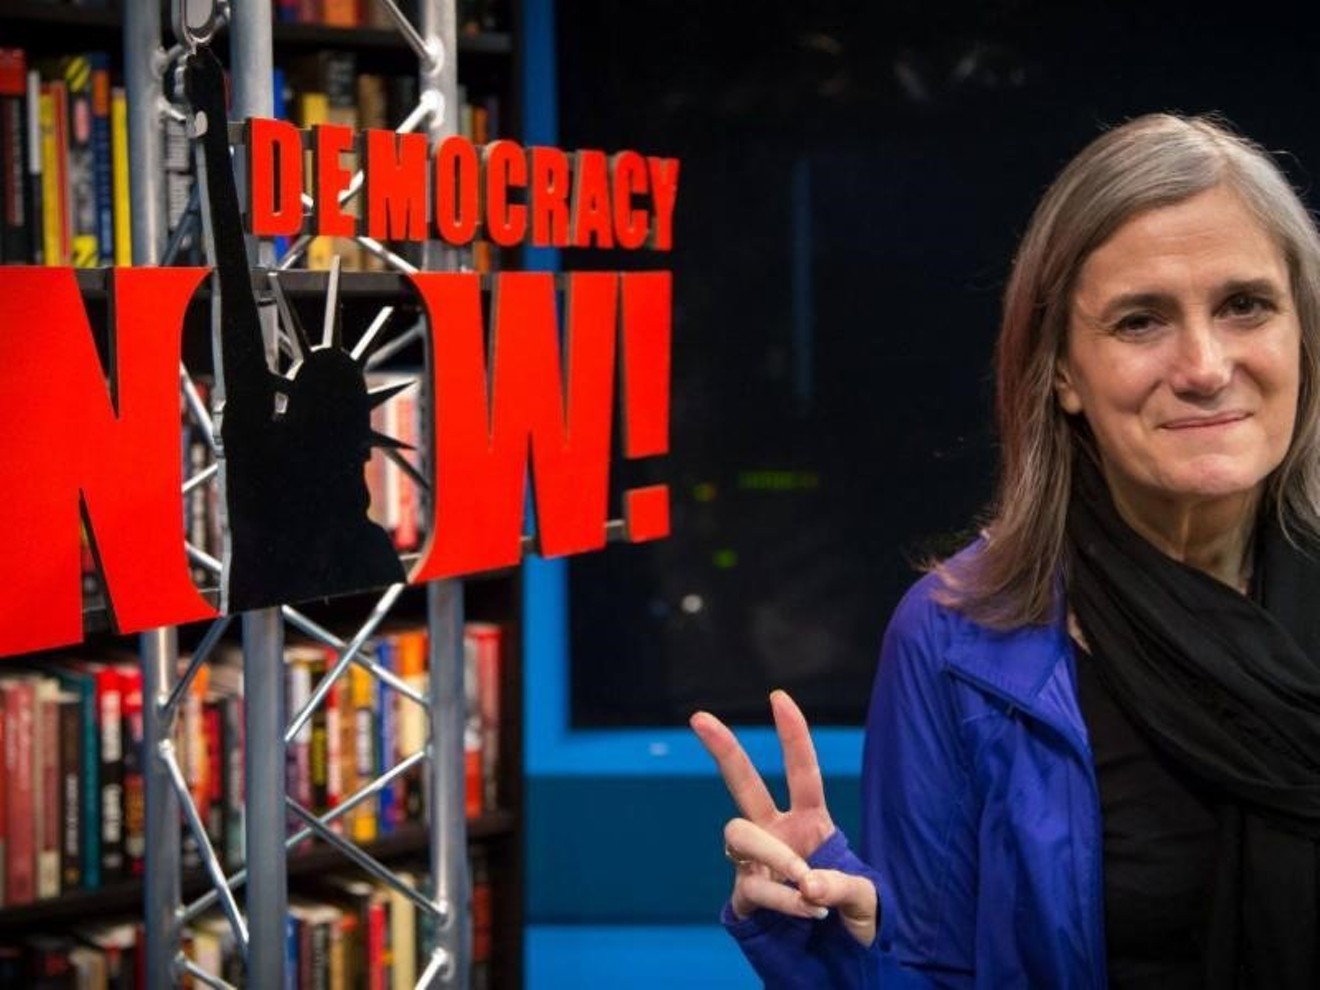 Amy Goodman talks about Democracy Now! at East High School on Friday, March 15.